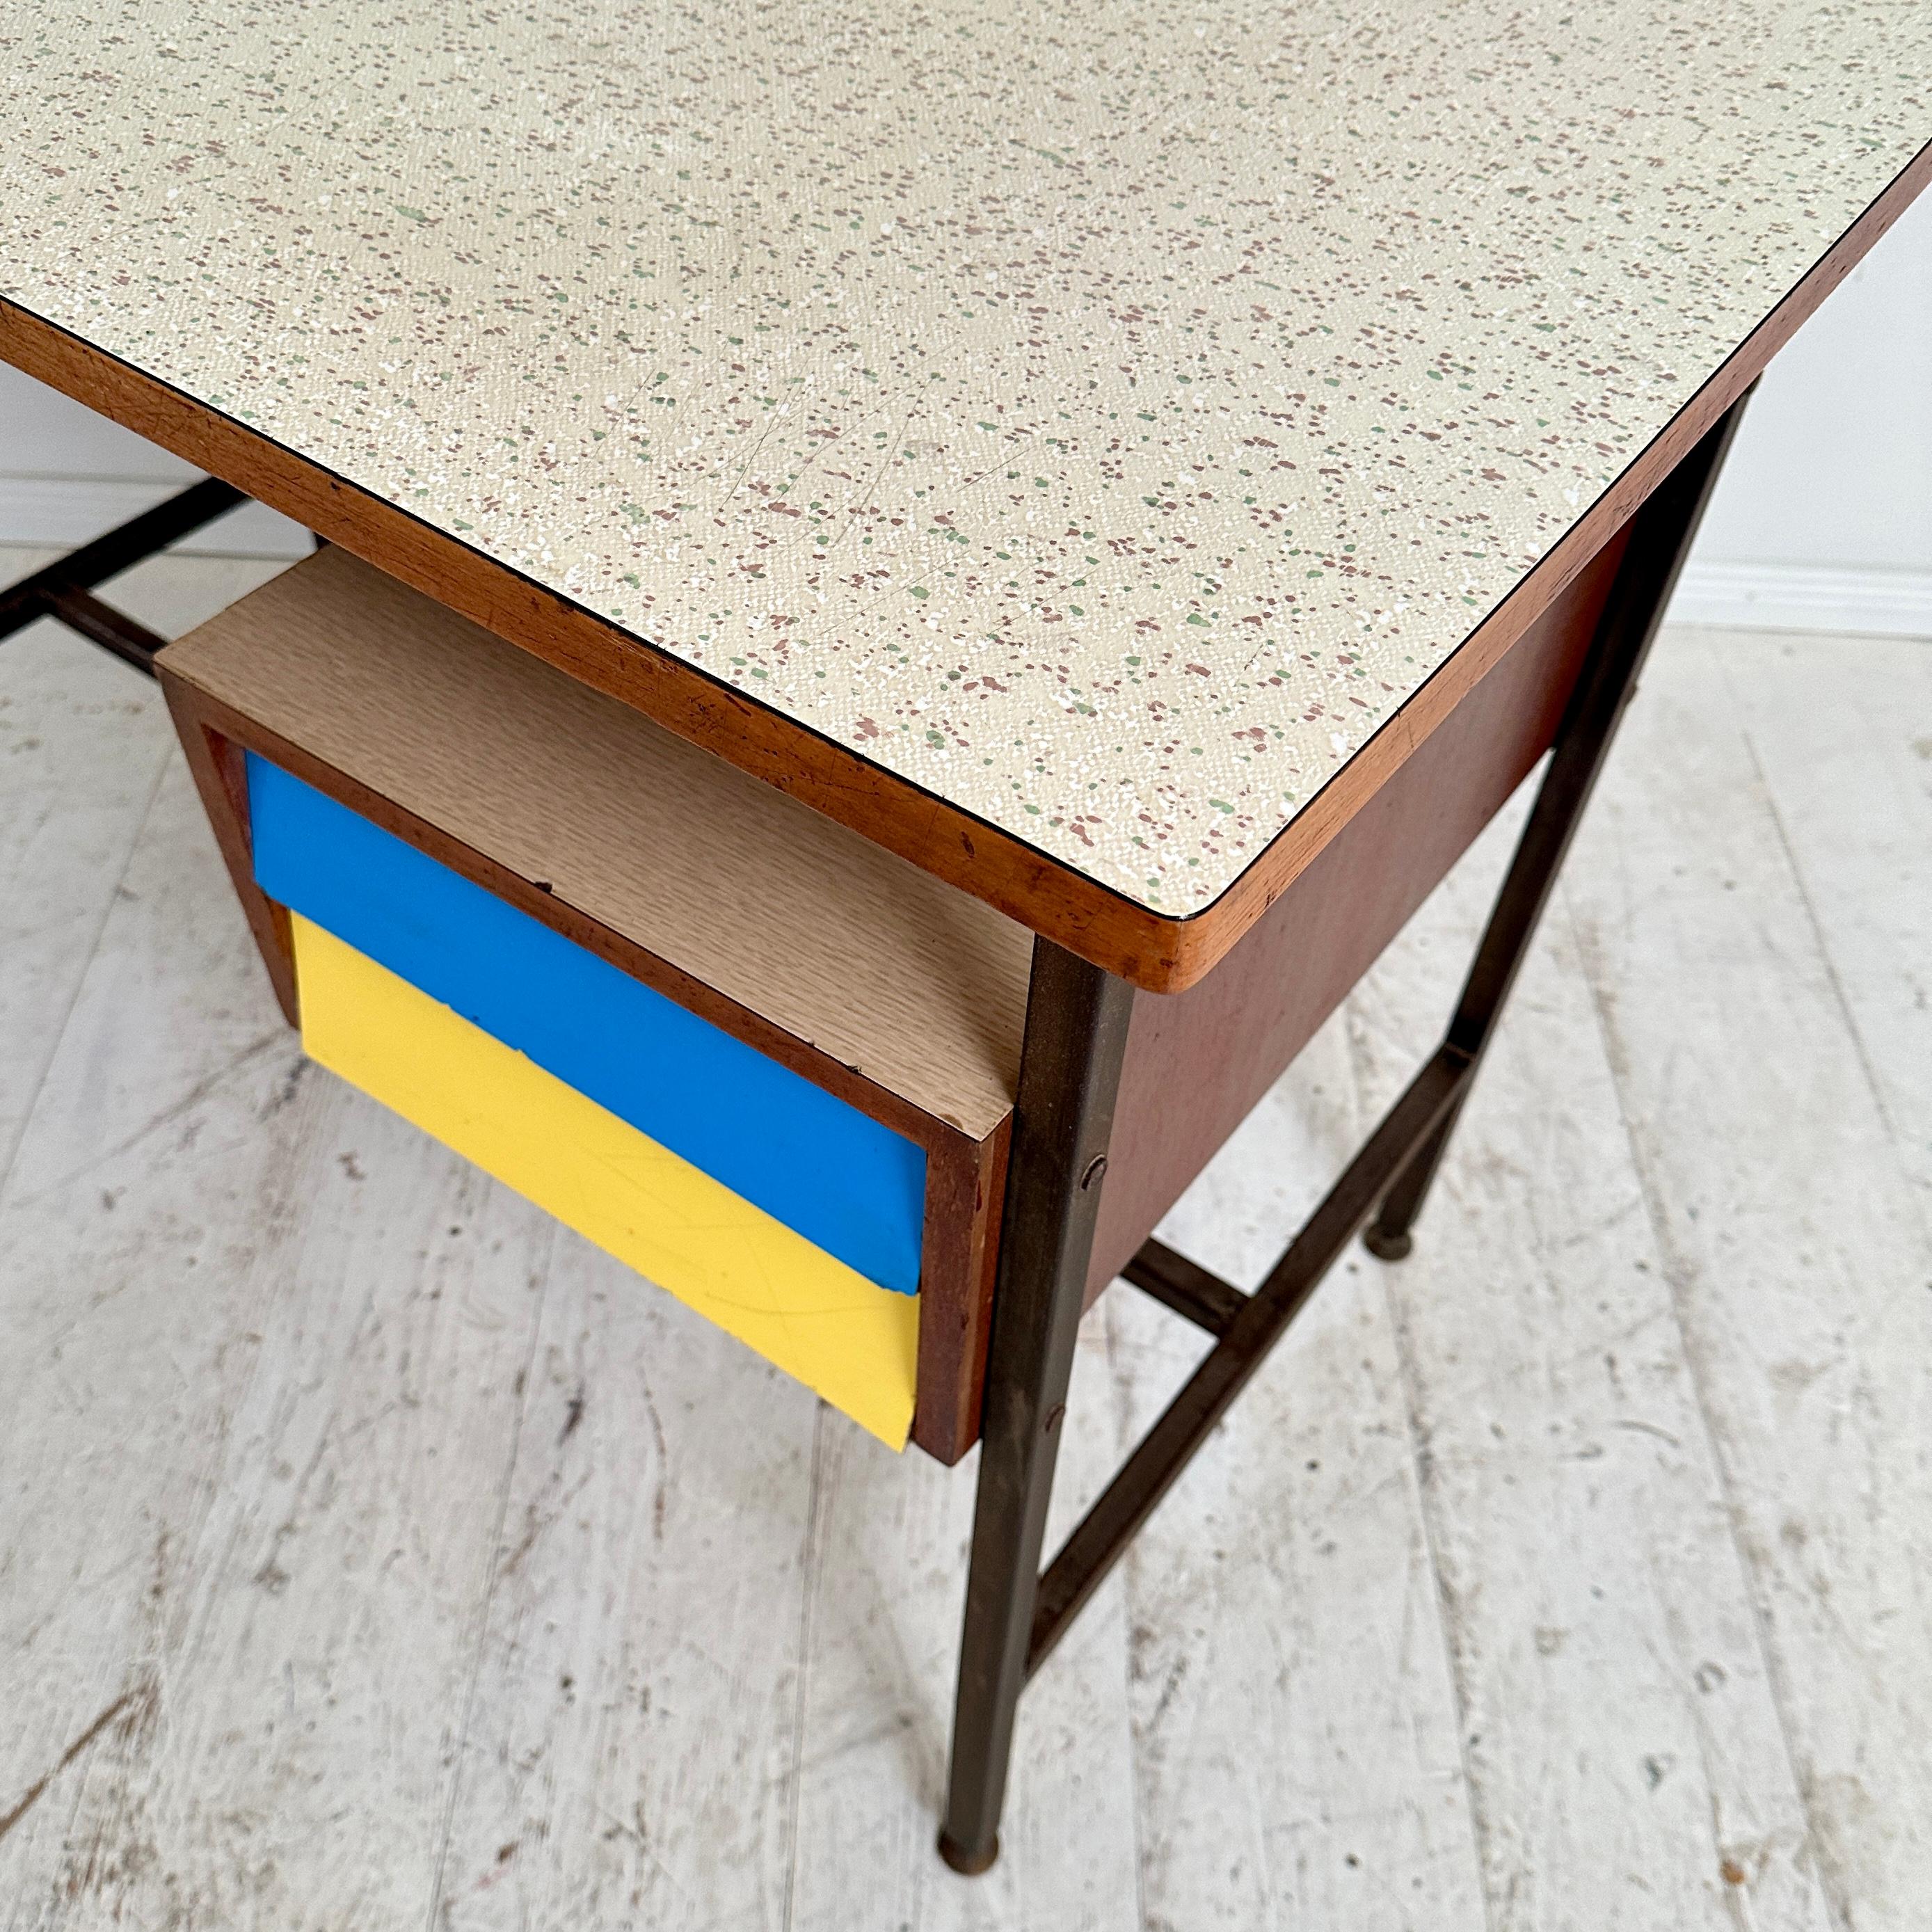 Small Mid Century Italian Desk in Metal, Walnut and Formica, around 1950 For Sale 5